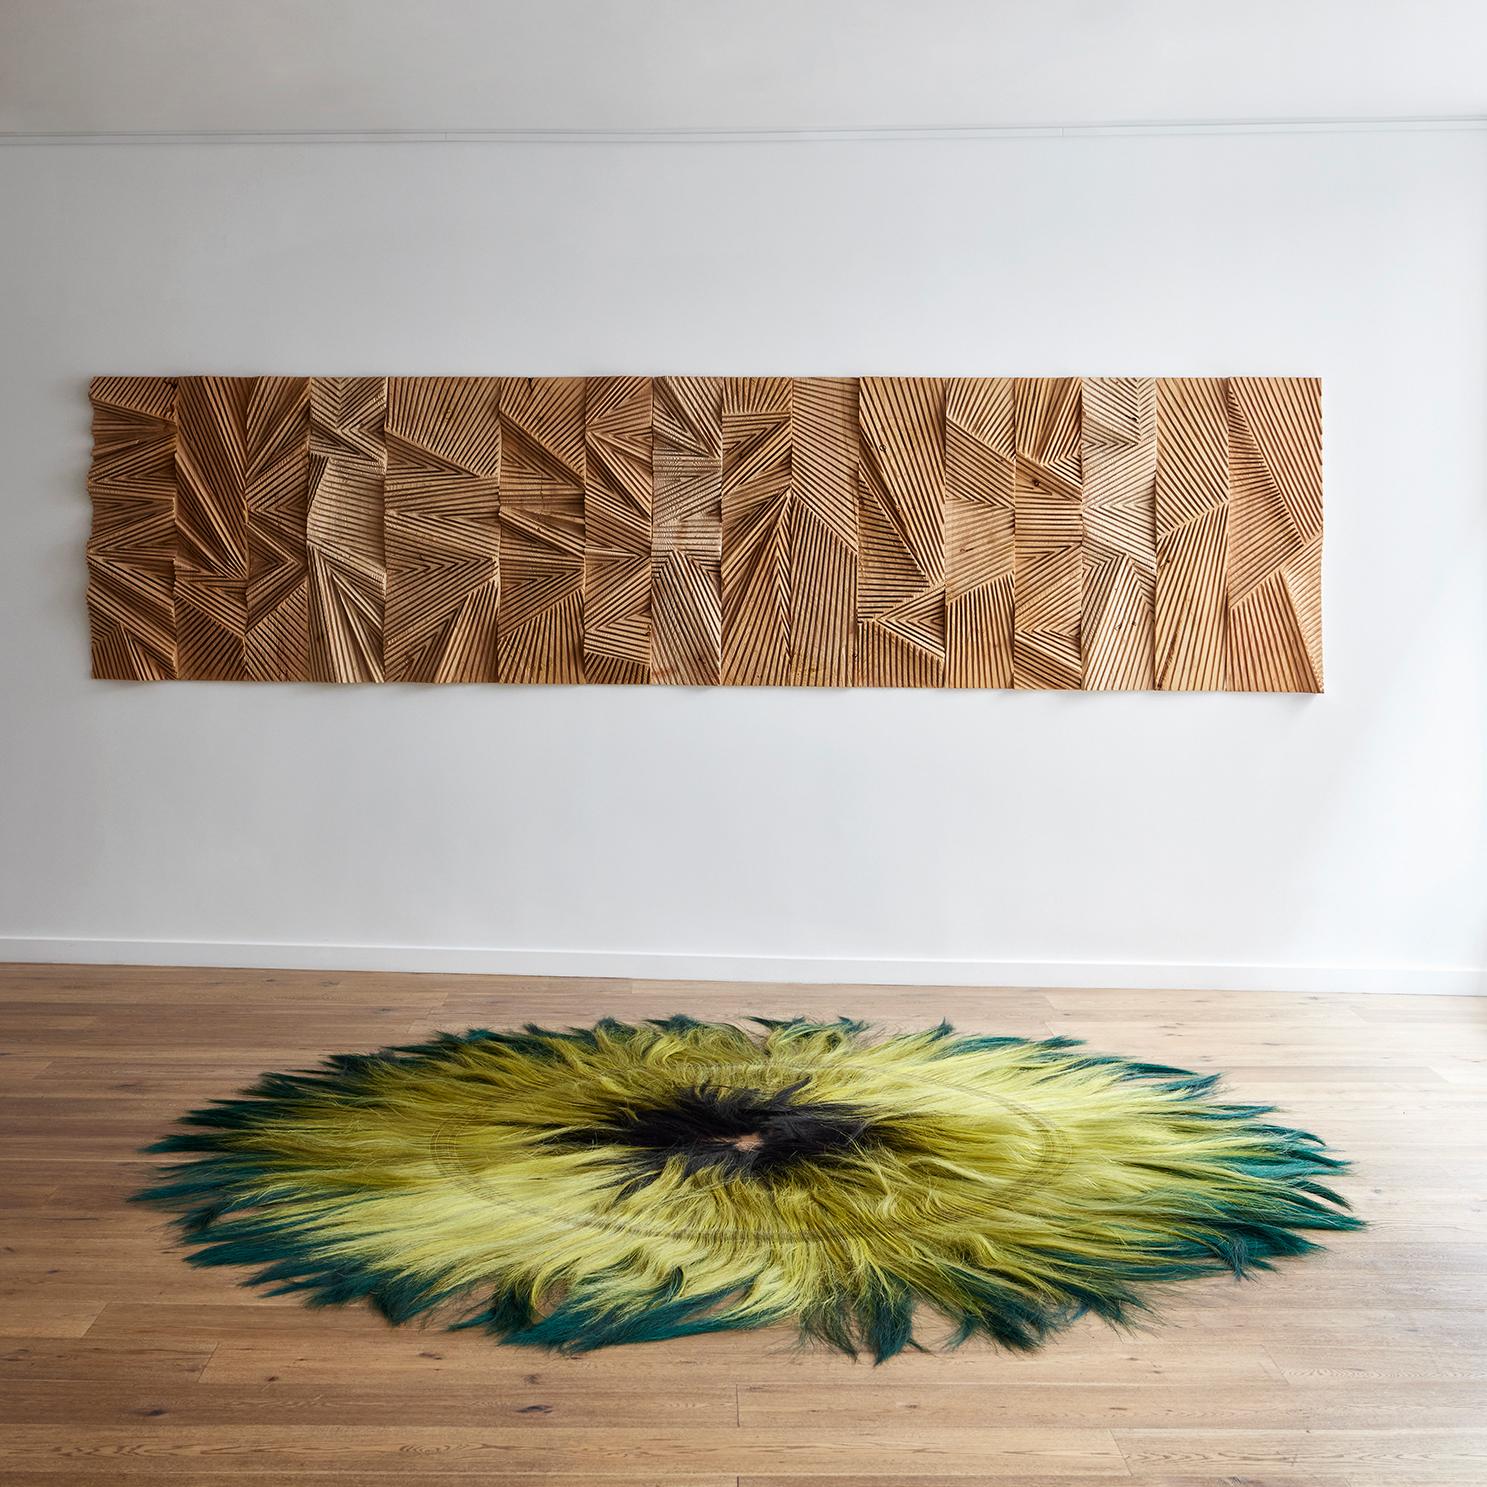 Zig Zag, sculpted wood panel made with Douglas-fir wood is a piece from Etienne Moyat, represented by Galerie Negropontes in Paris, France. 

Etienne Moyat’s work reflects his respect and love of nature. Trained as a cabinetmaker, his first